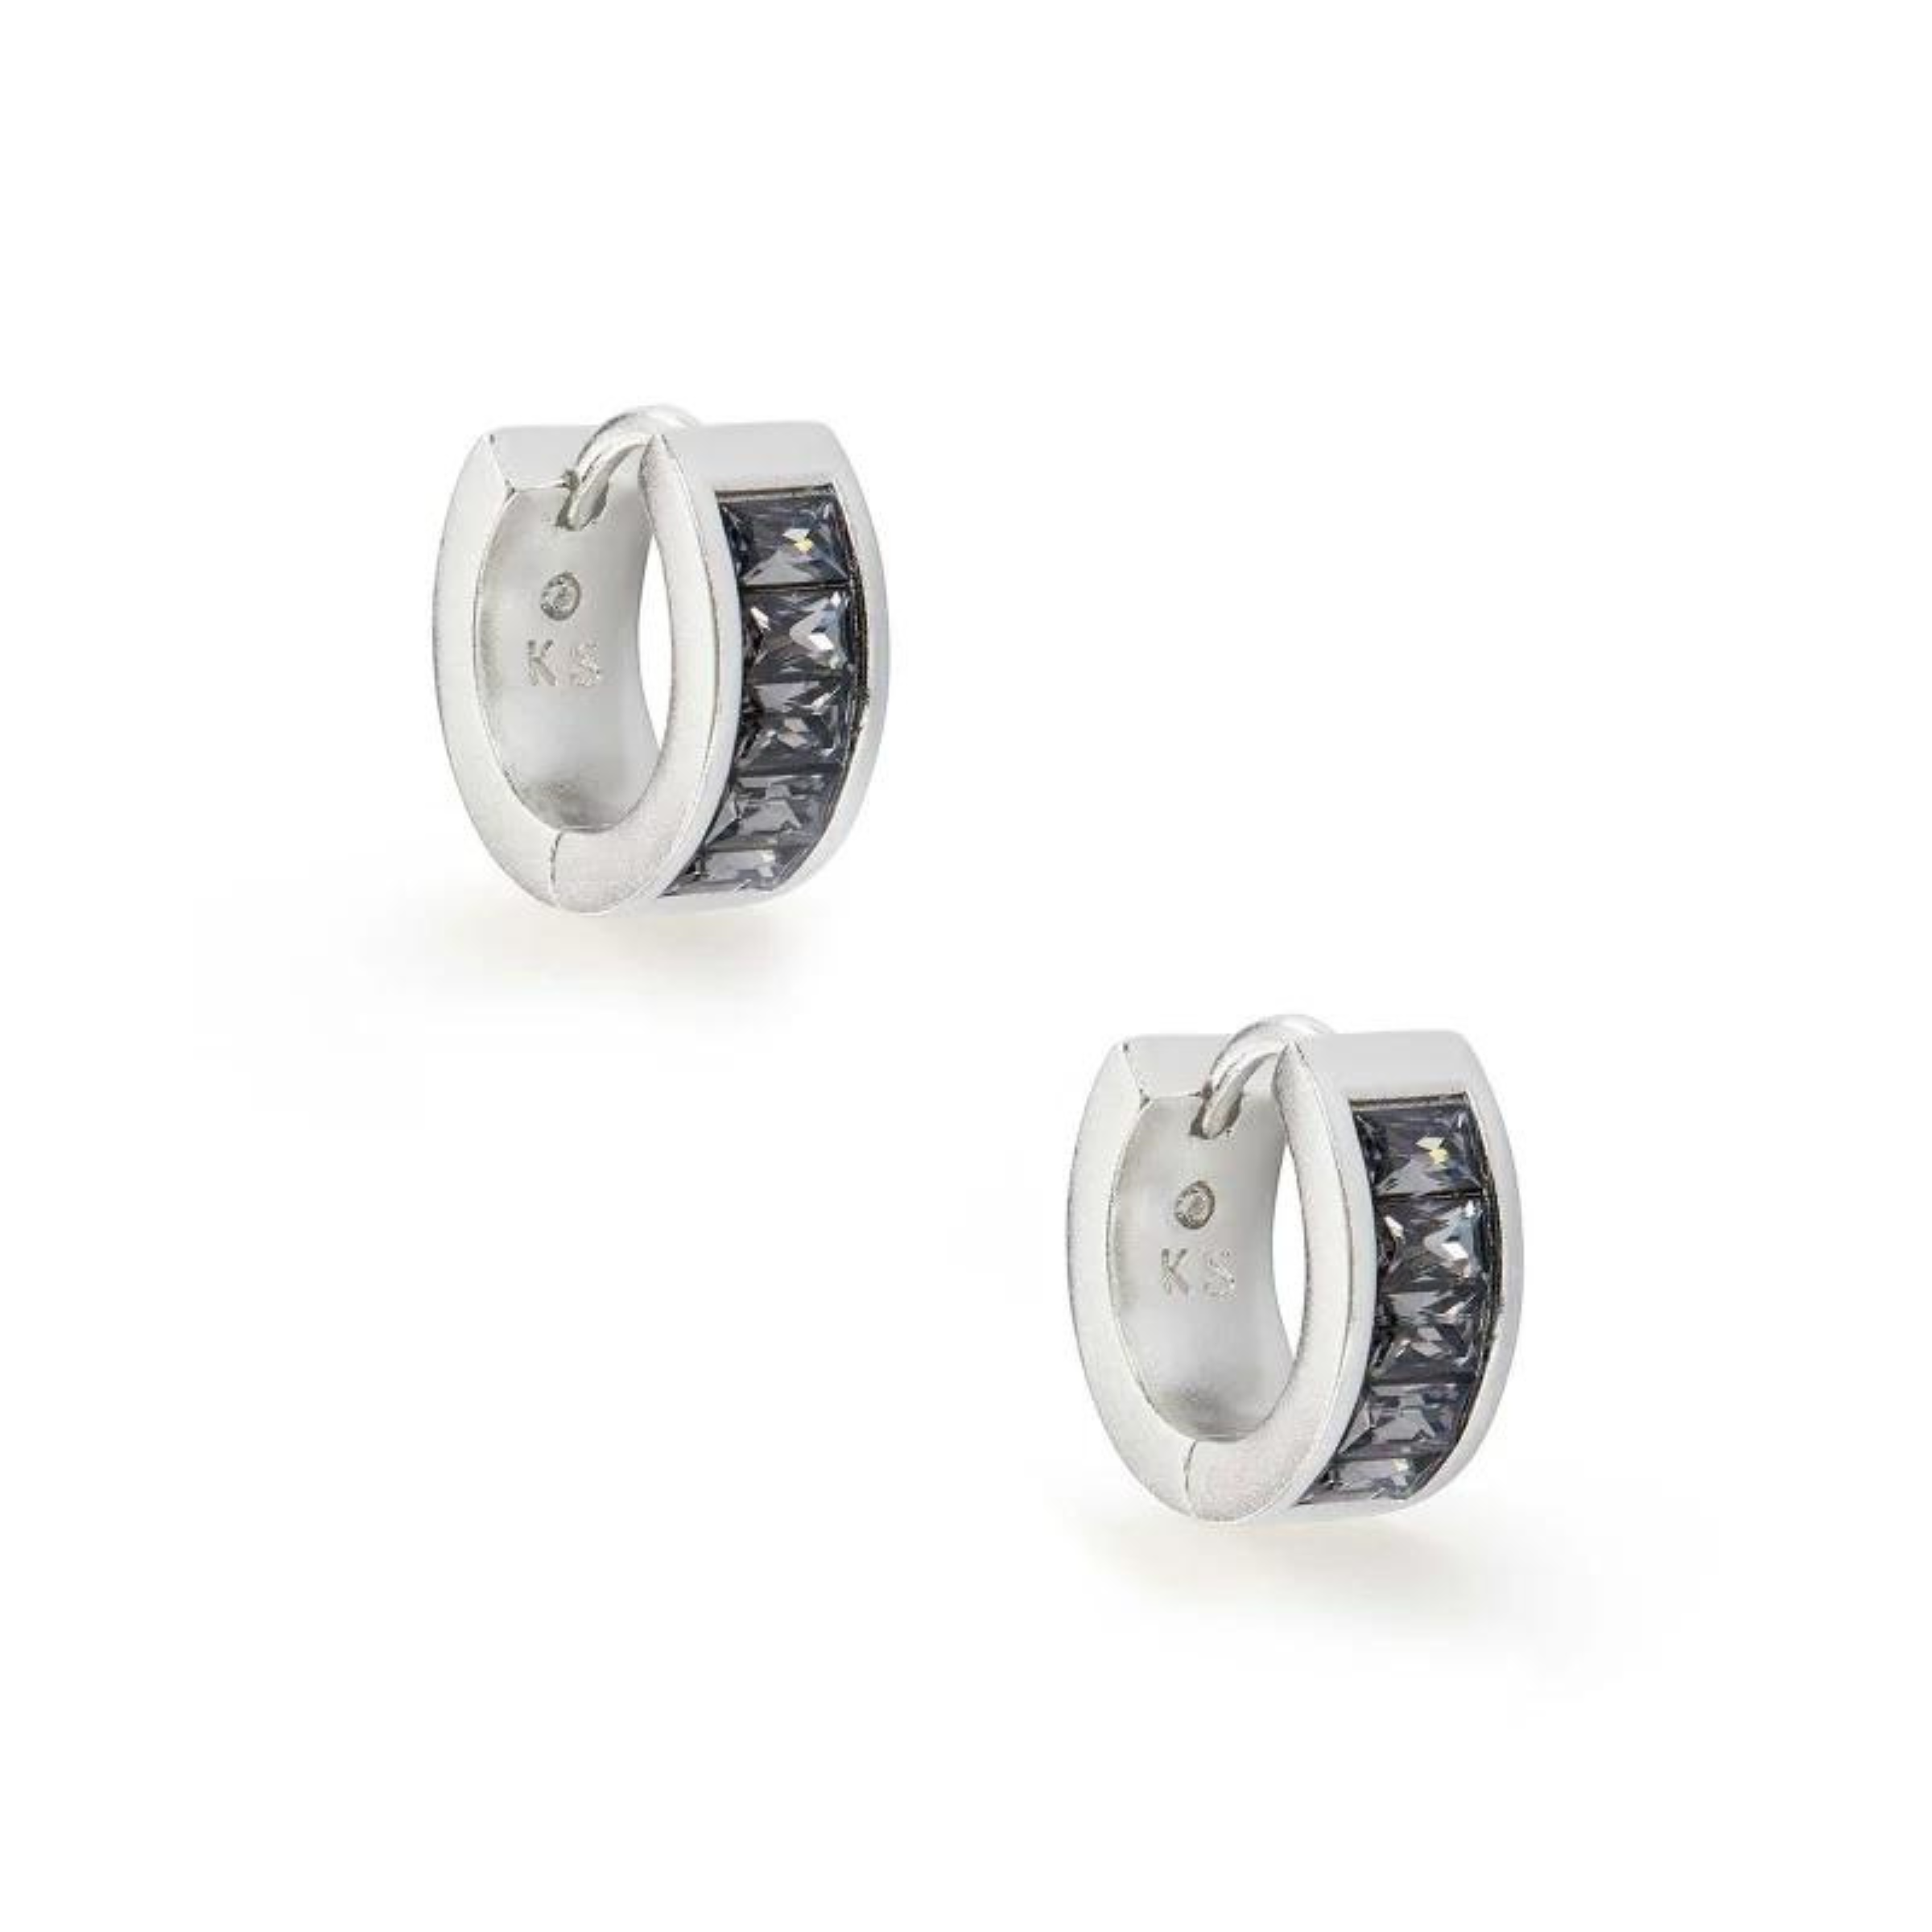 Silver huggie earrings with gray crystals, pictured on a white background.